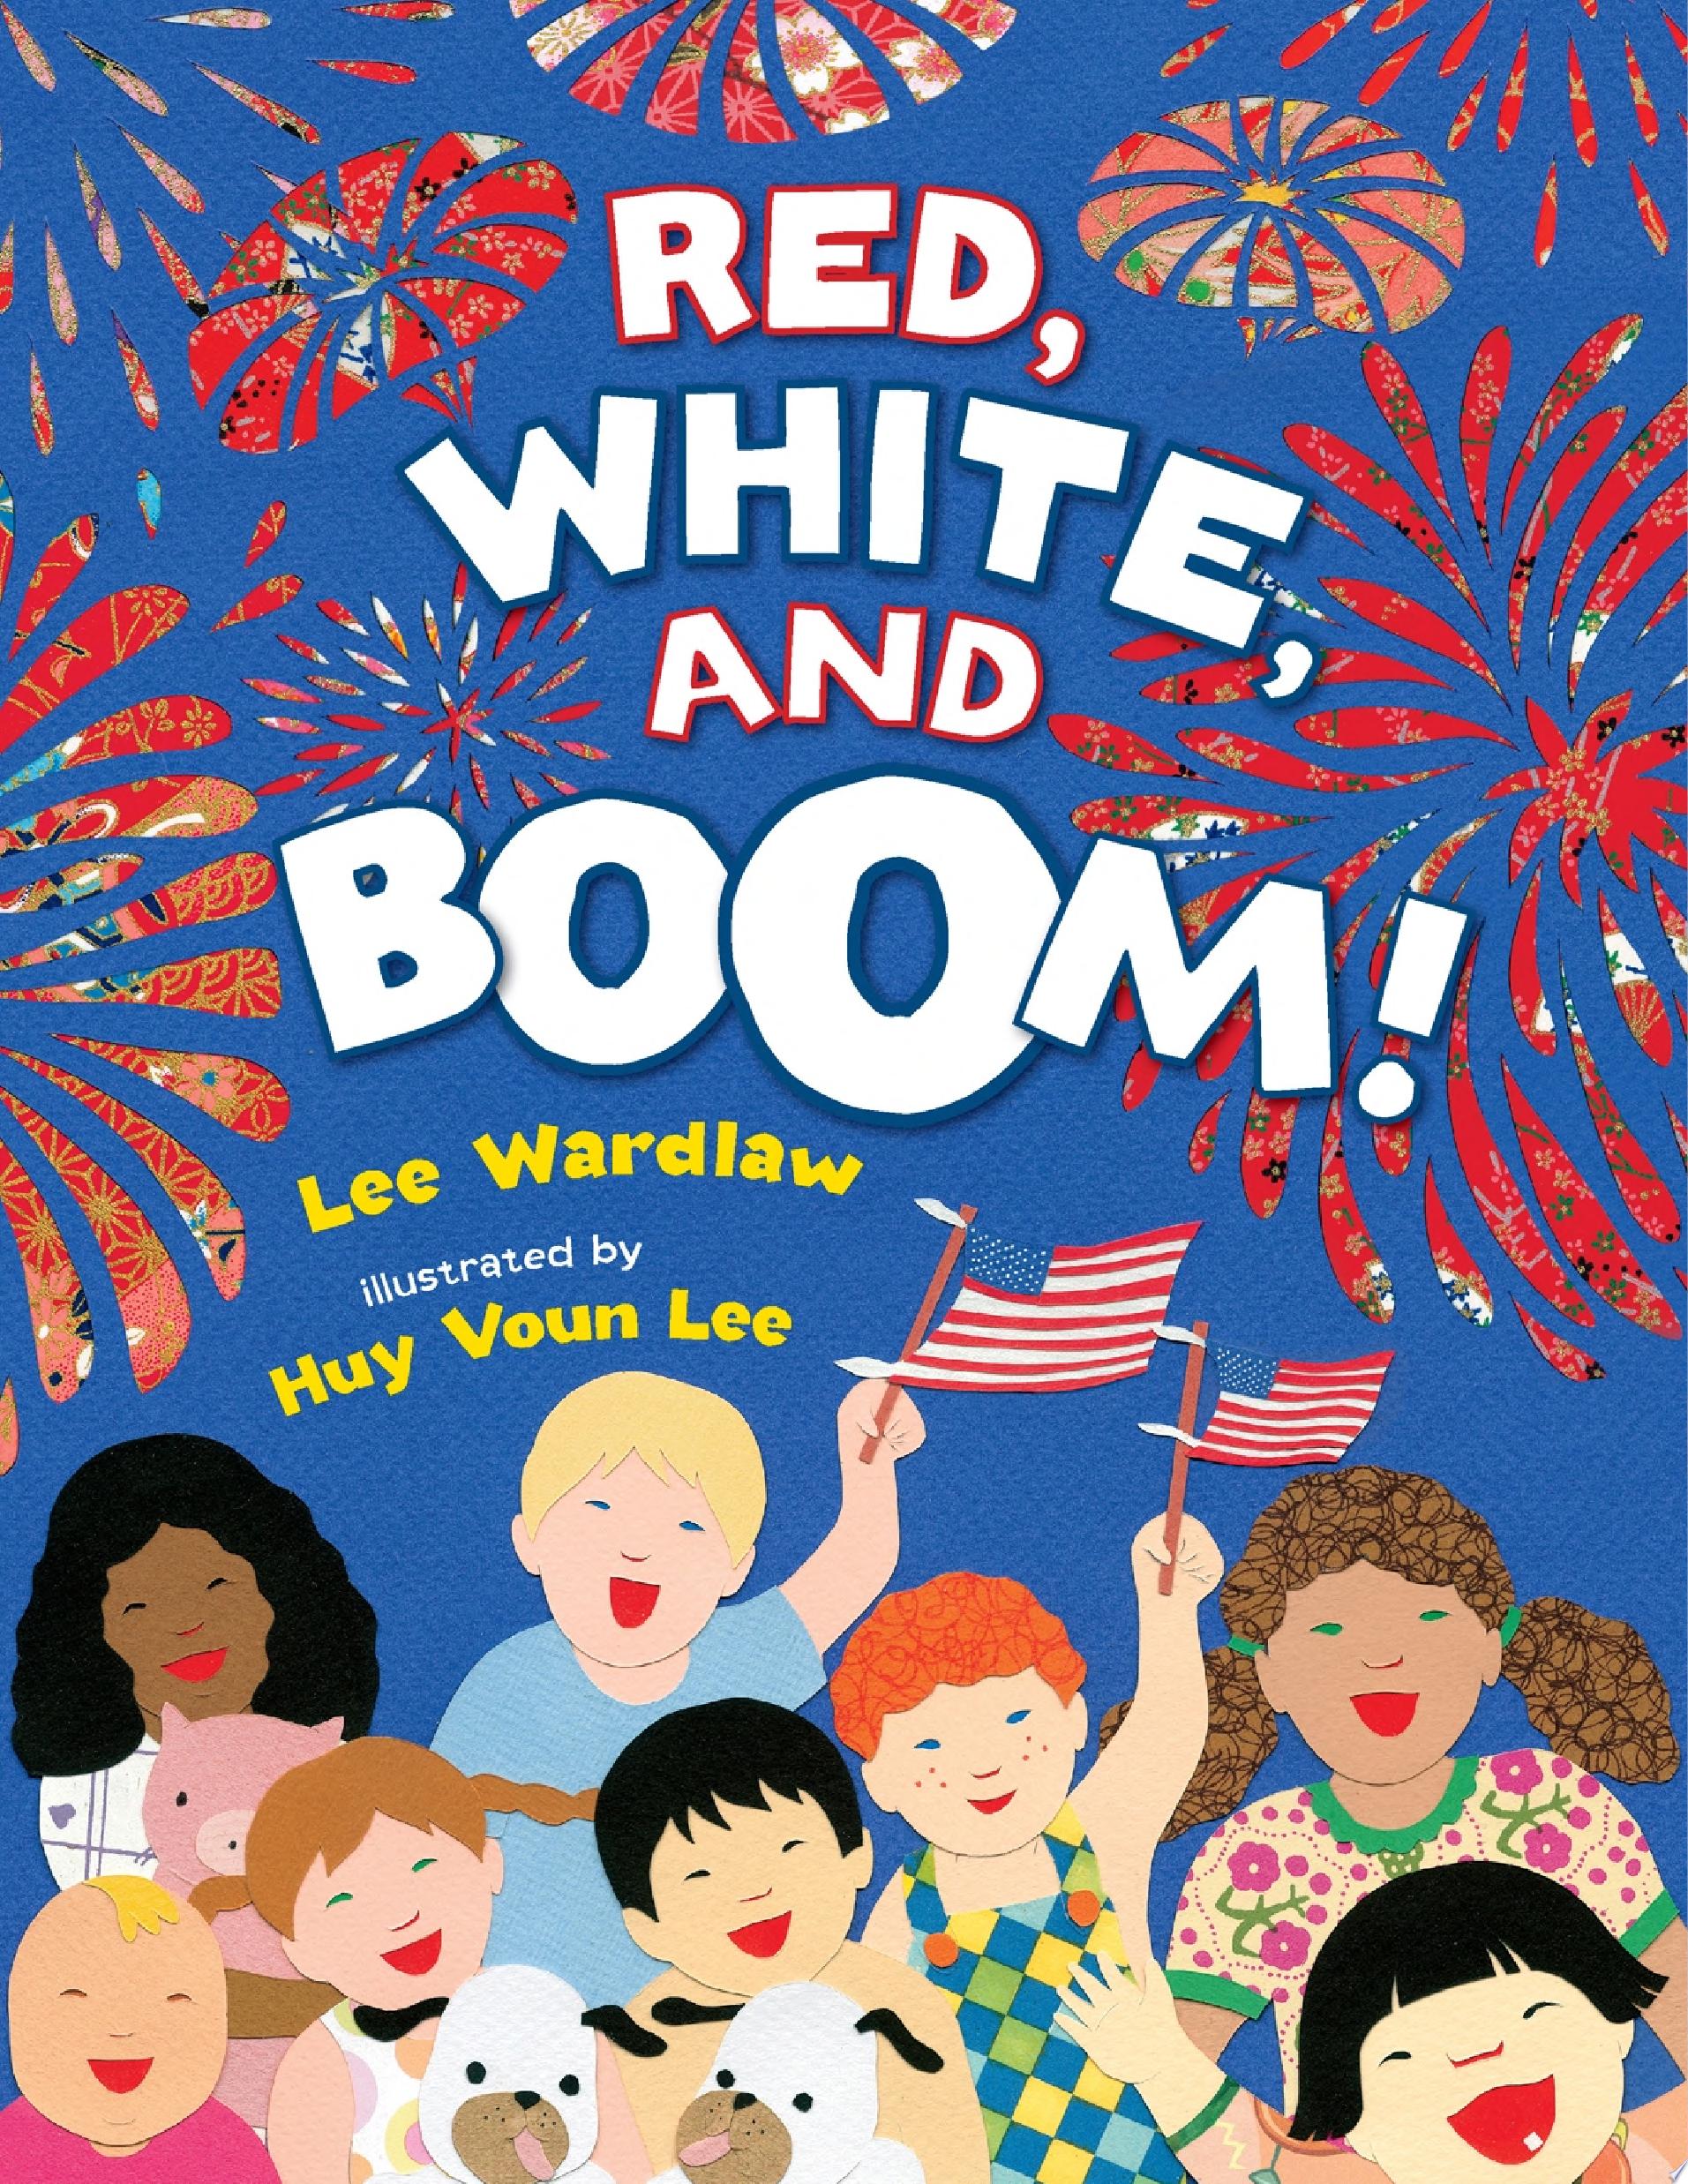 Image for "Red, White, and Boom!"